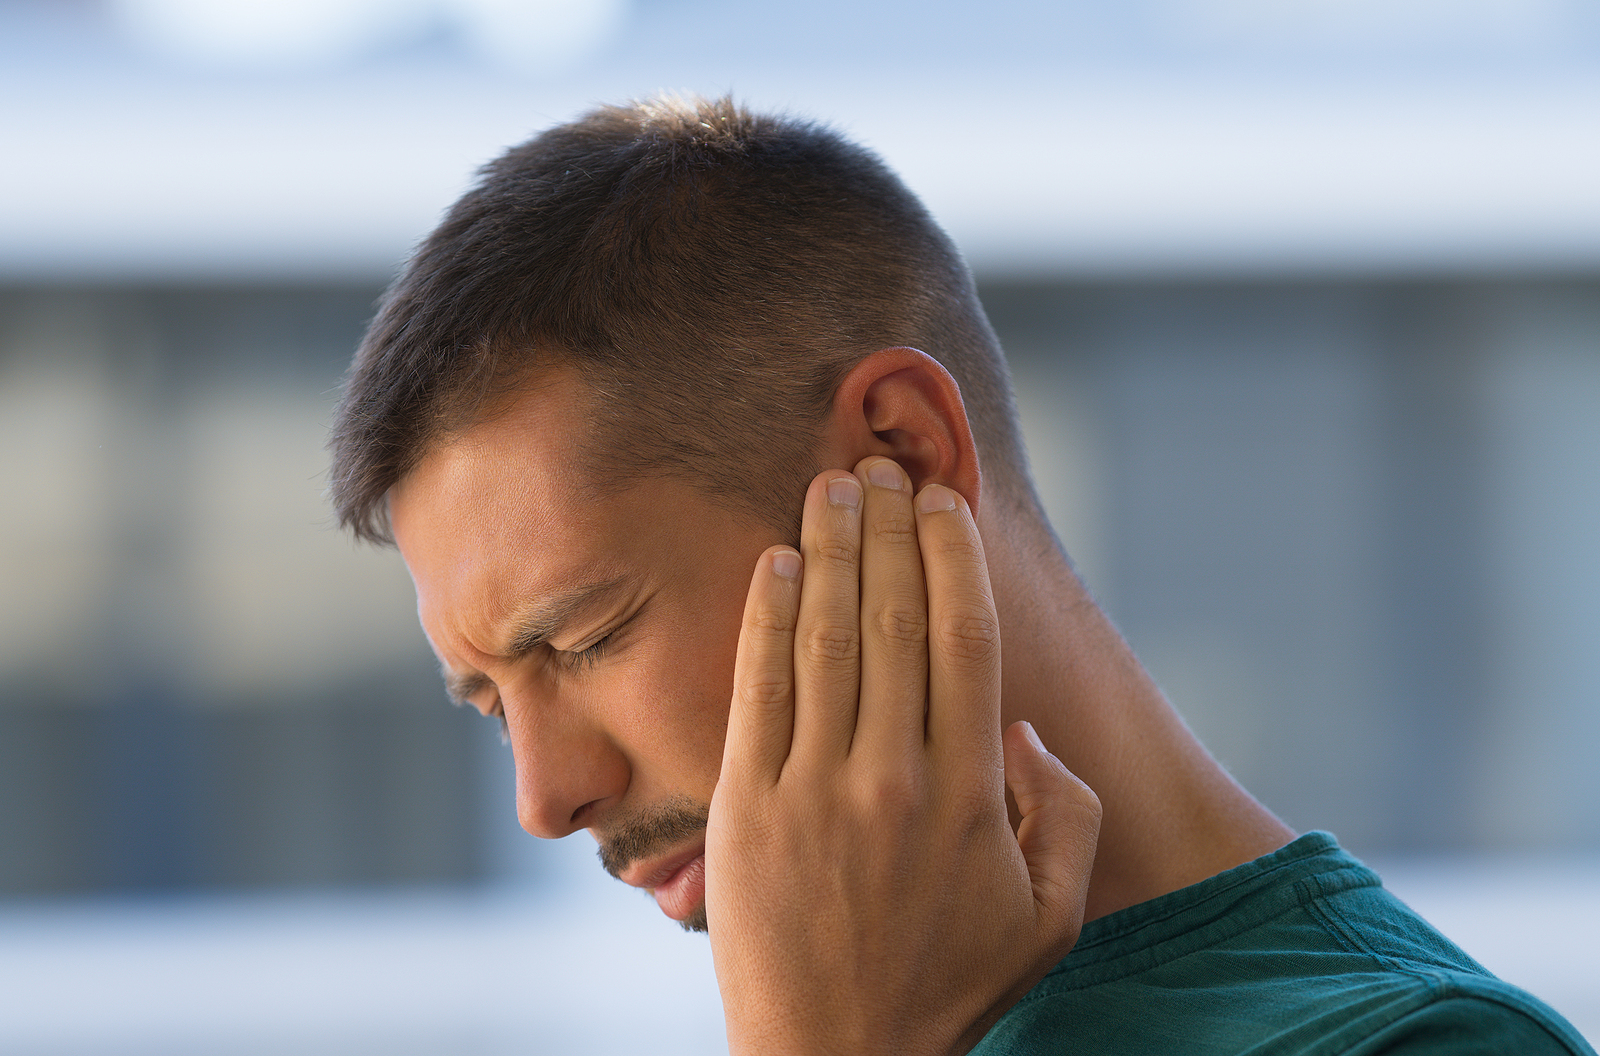 Featured image for “Hearing Loss: The Most Common Work-Related Injury in the US ”